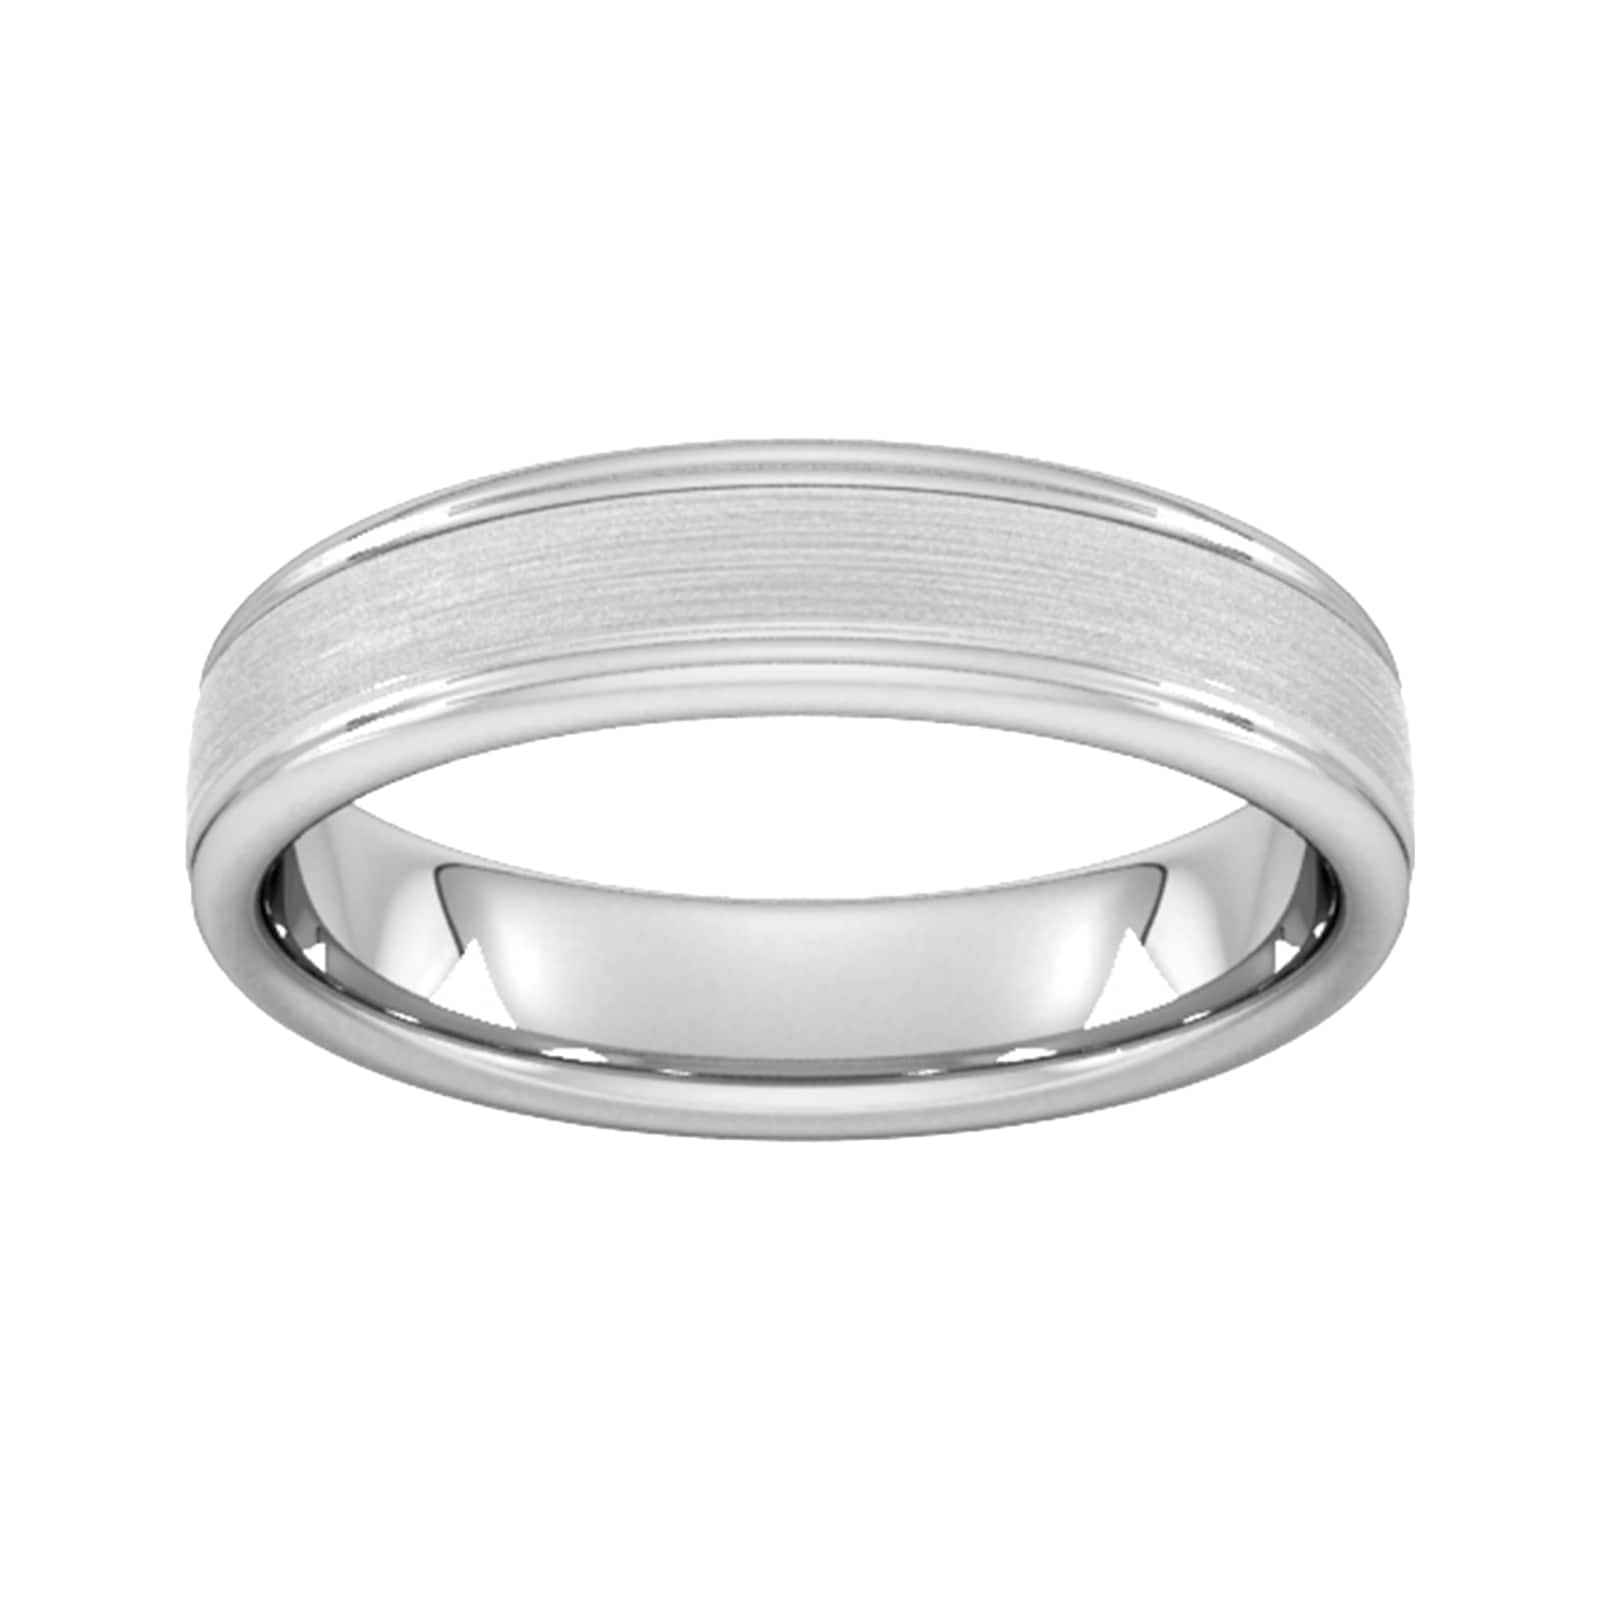 5mm Traditional Court Standard Matt Centre With Grooves Wedding Ring In 950 Palladium - Ring Size I